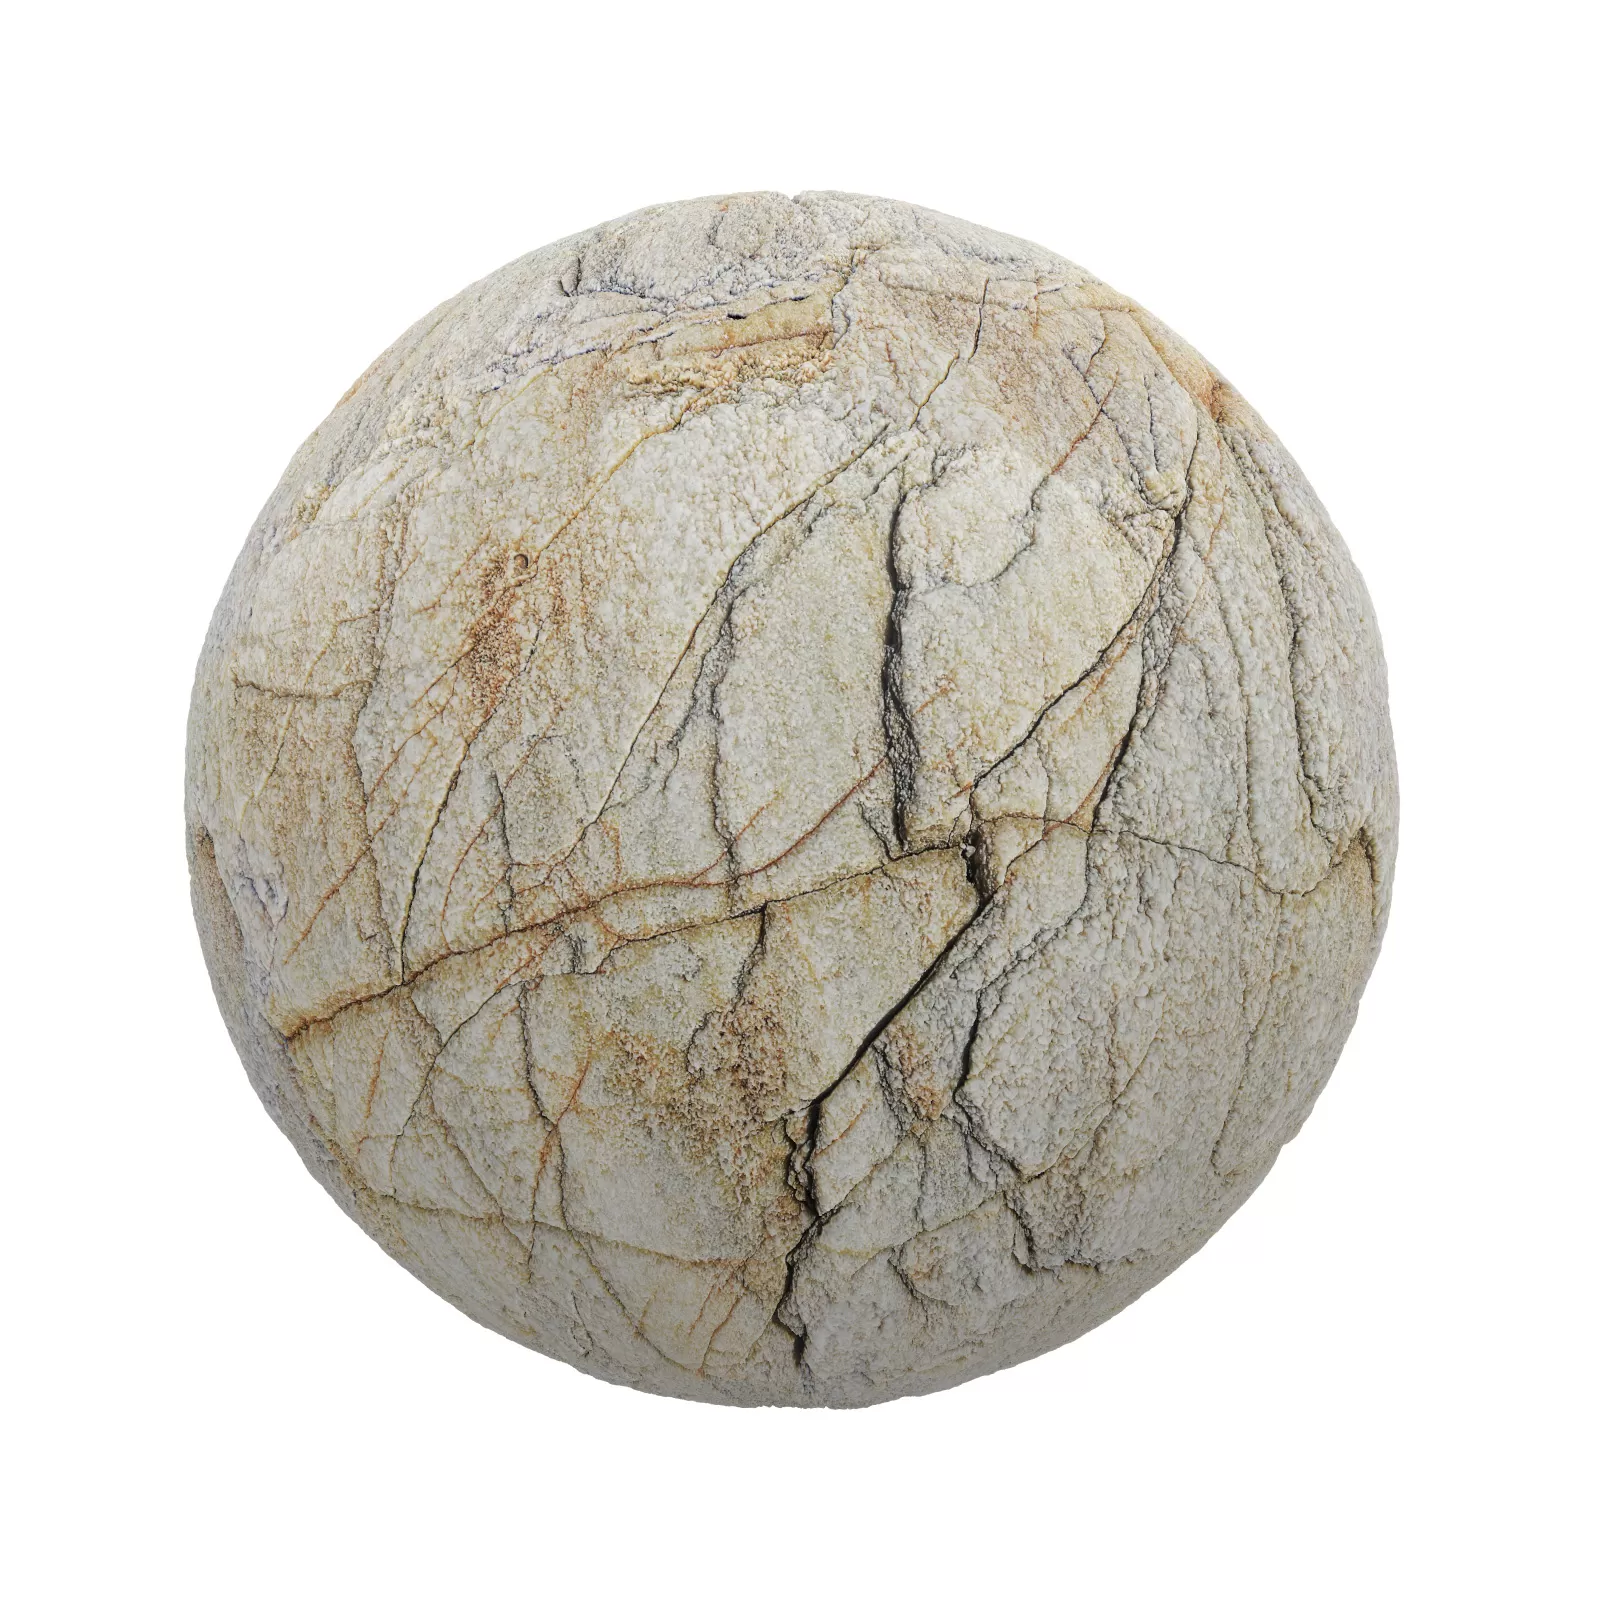 TEXTURES – STONES – CGAxis PBR Colection Vol 1 Stones – cracked yellow stone